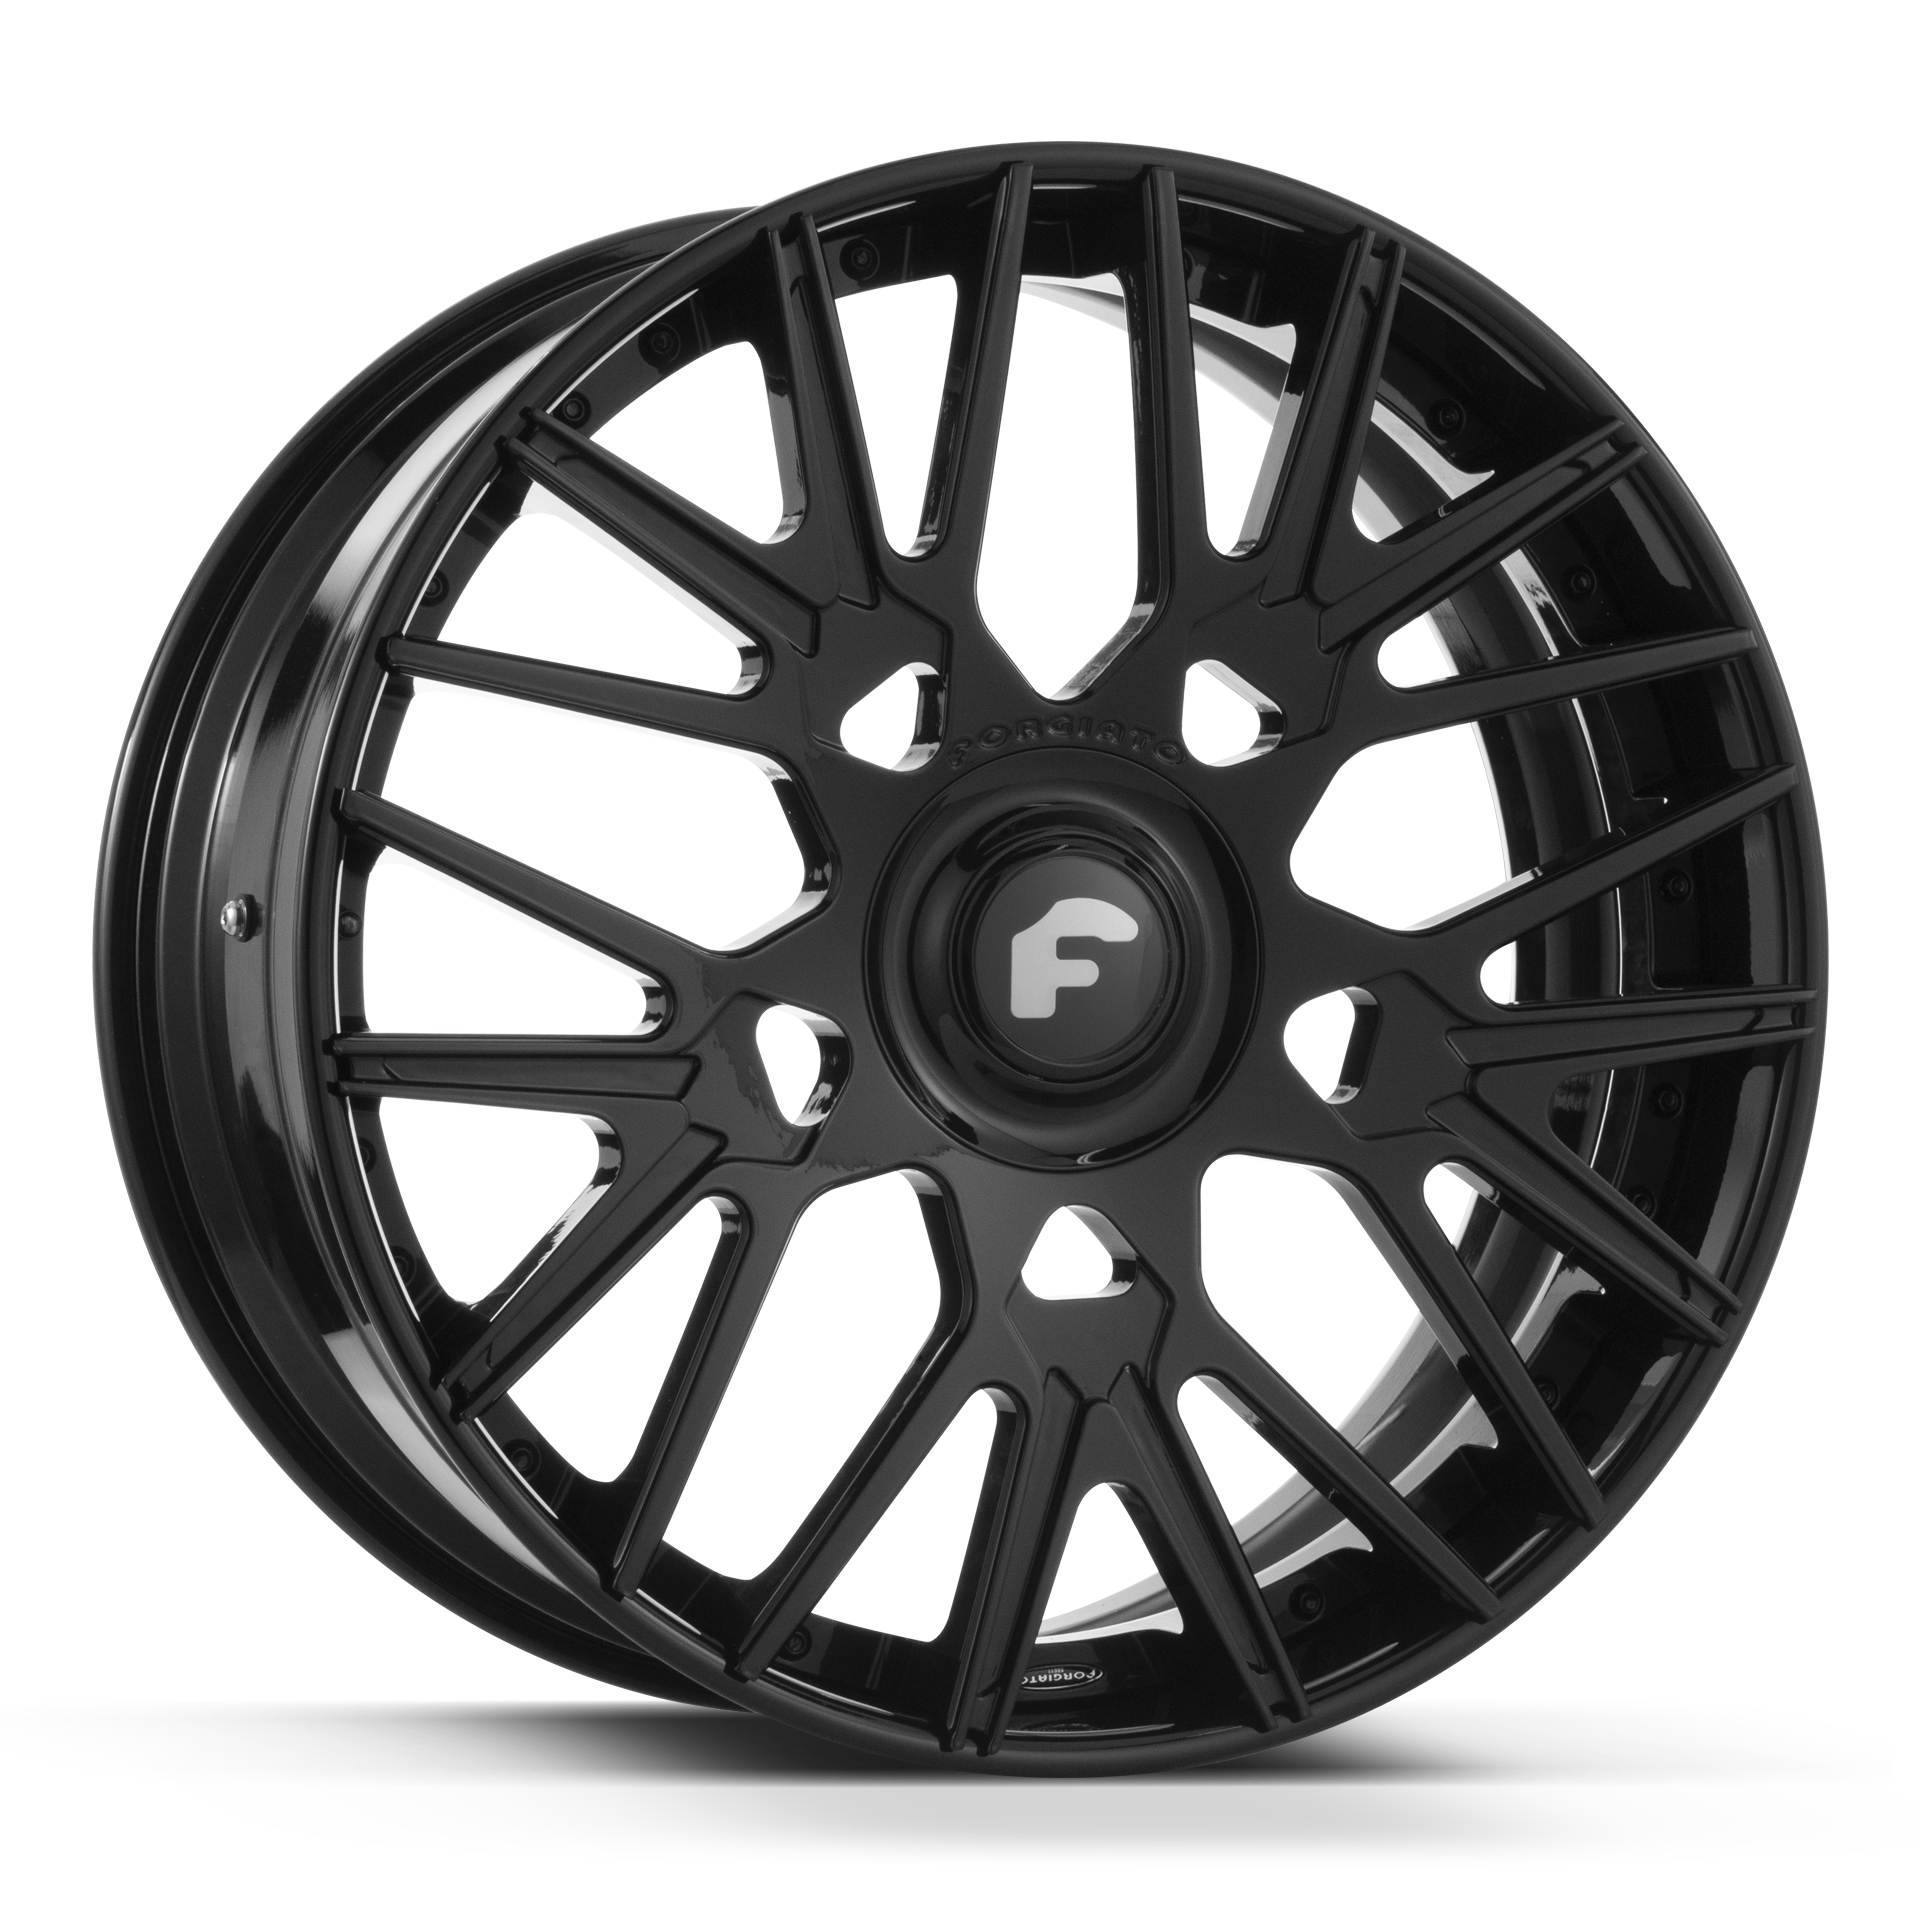 26" Set of Fratello for Jeep Cherokee Trackhawk (ECL Forging) - Wheels | Rims